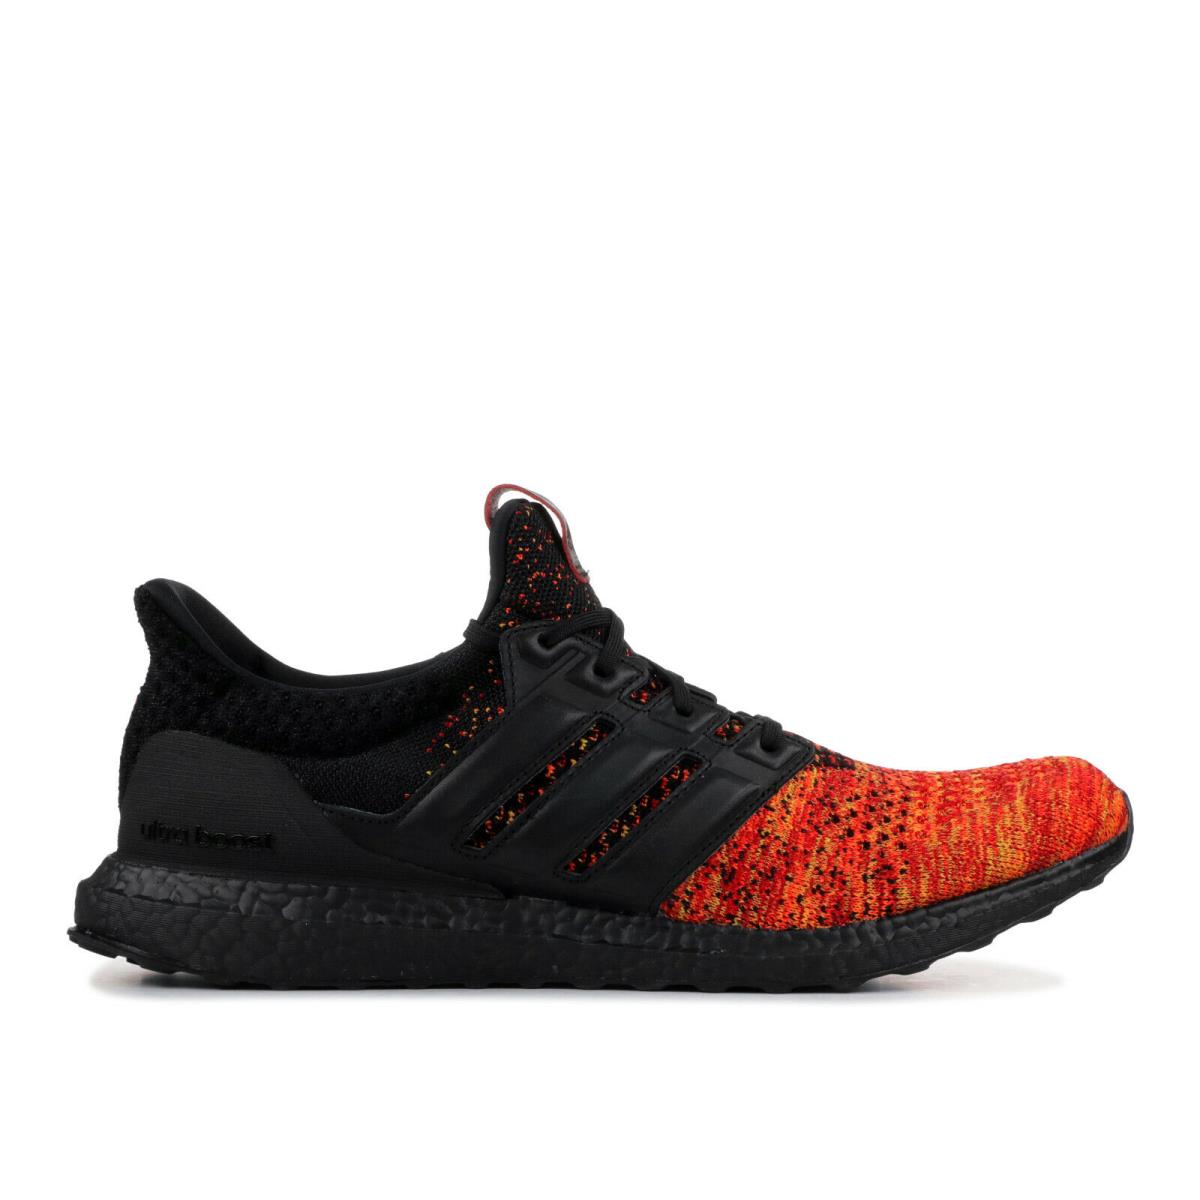 Adidas Ultra Boost 4.0 Game of Thrones Targaryen Dragons Size 8.5. EE3709 | shoes - Multicolor SporTipTop